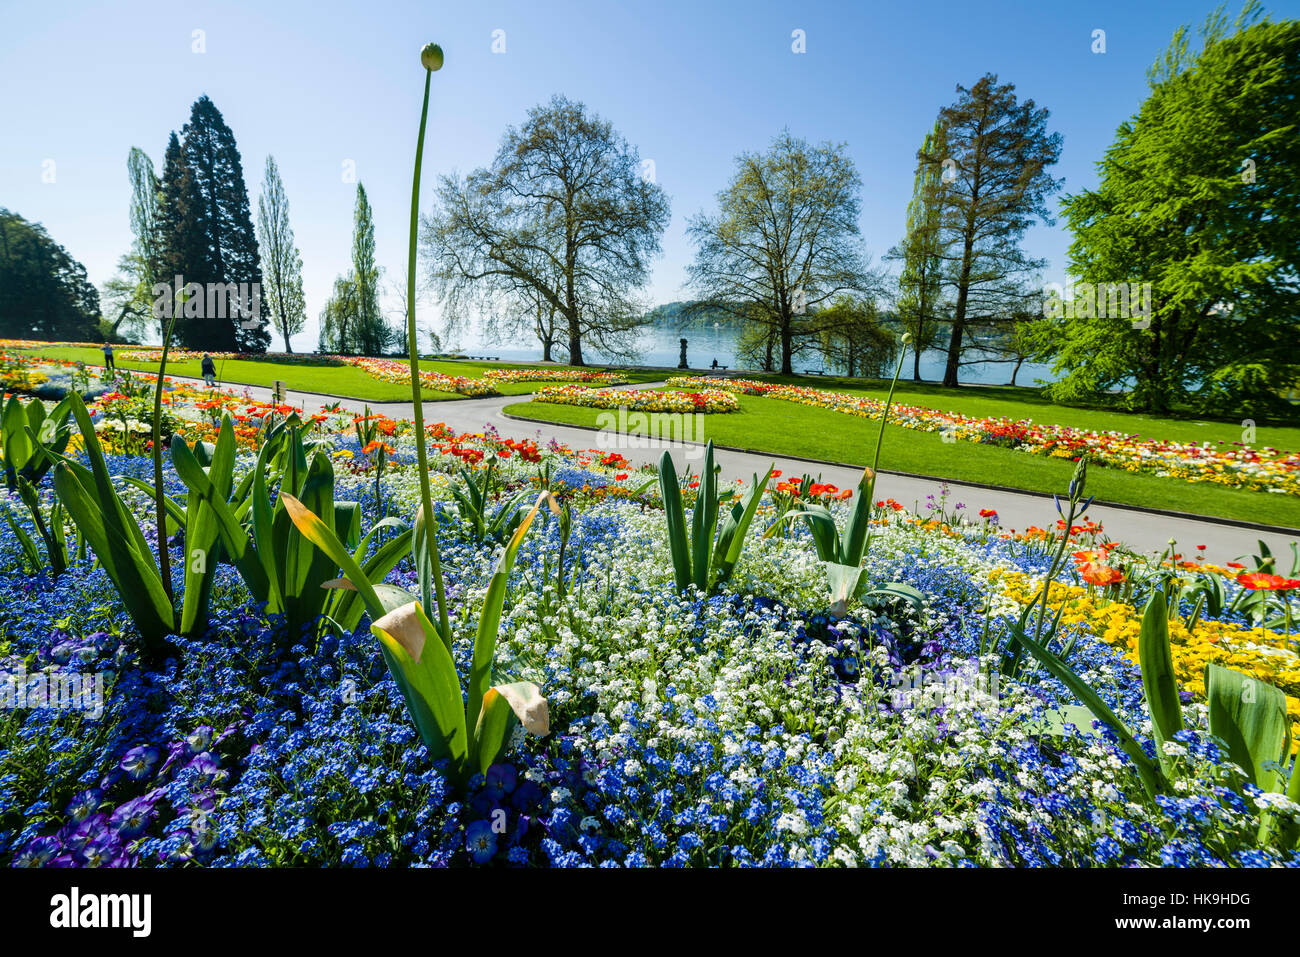 Landscape gardening and blooming flowers at Island Mainau, the 'Island of flowers' at Lake Constance Stock Photo